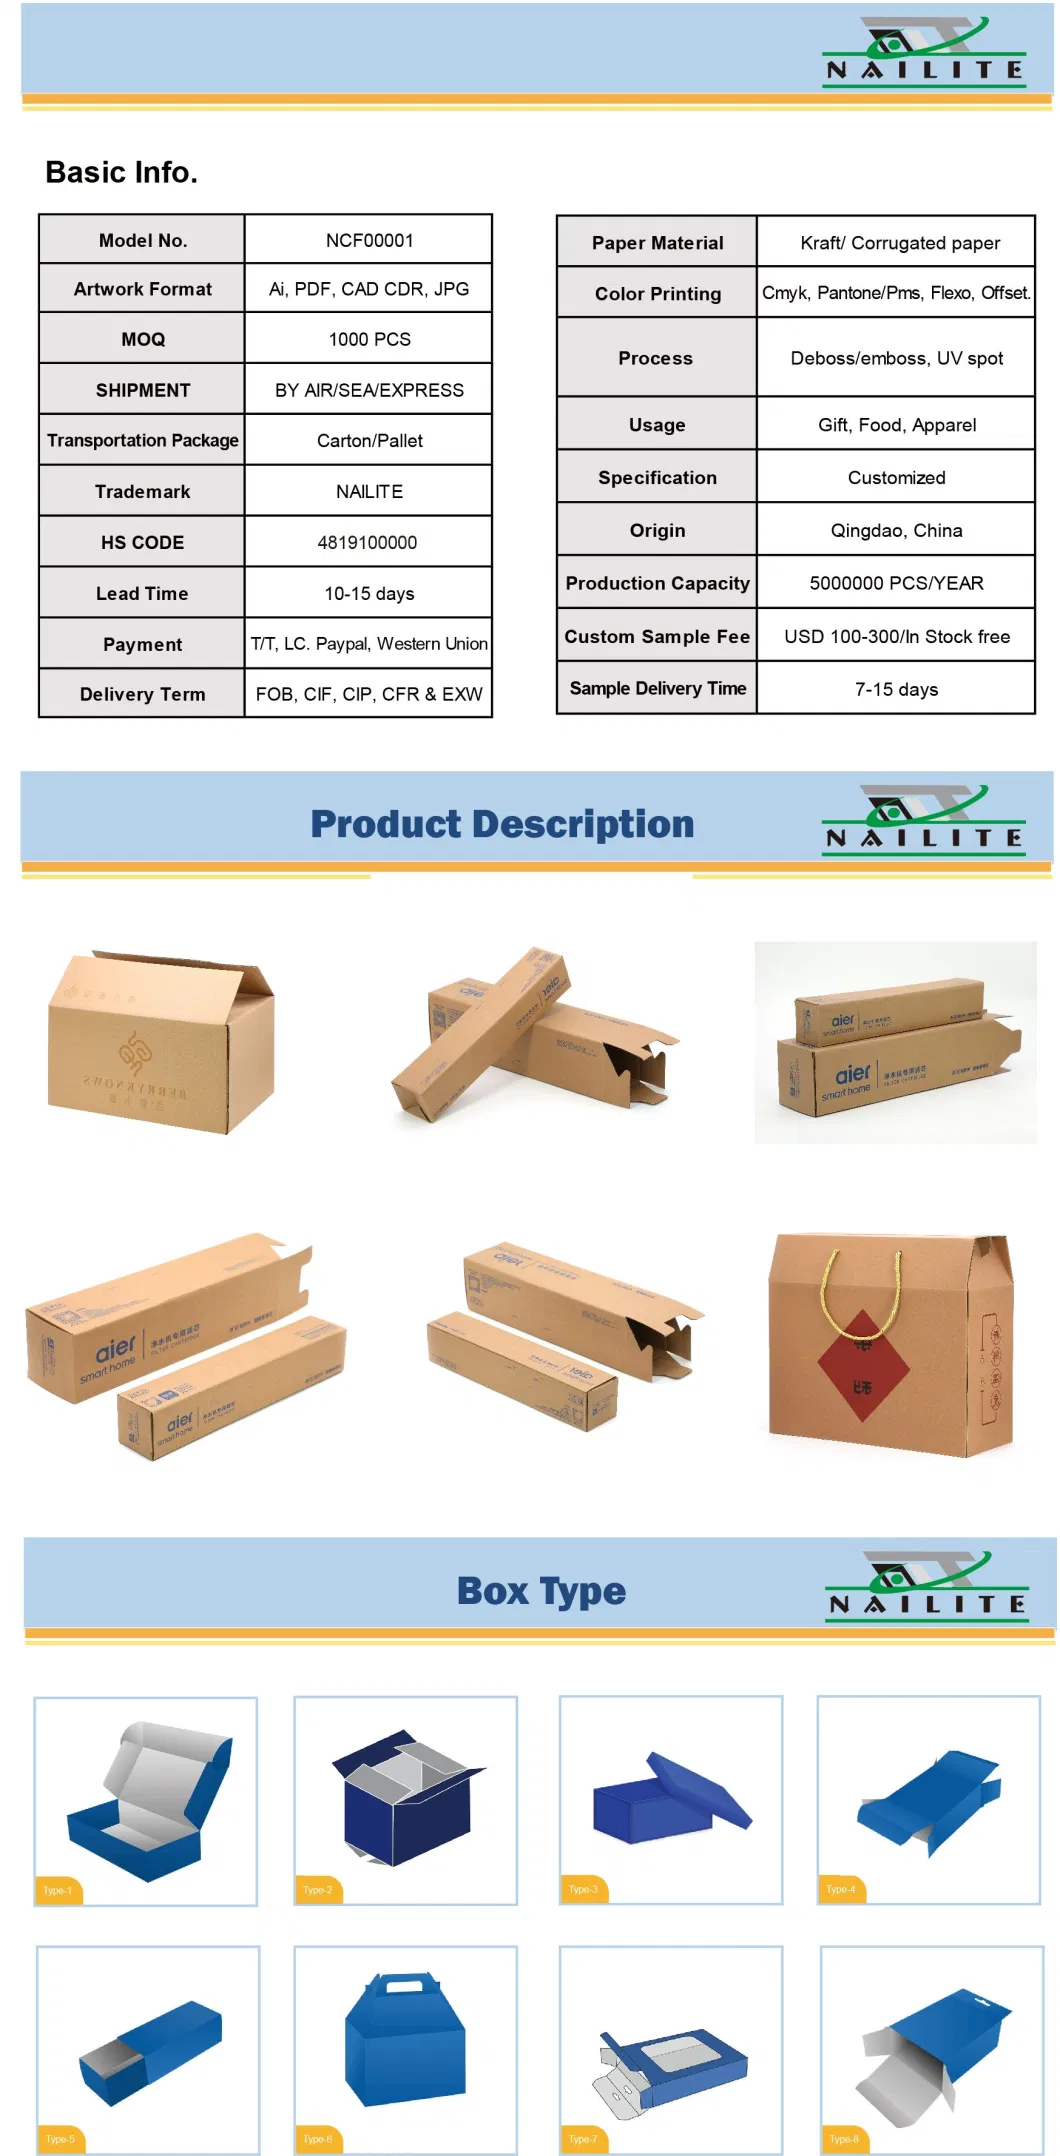 Printed/UV Spot Rugged Corrugated Paper Industrial Product Packaging for Moving/Shipping /Tools/Fittings with Handle Rope